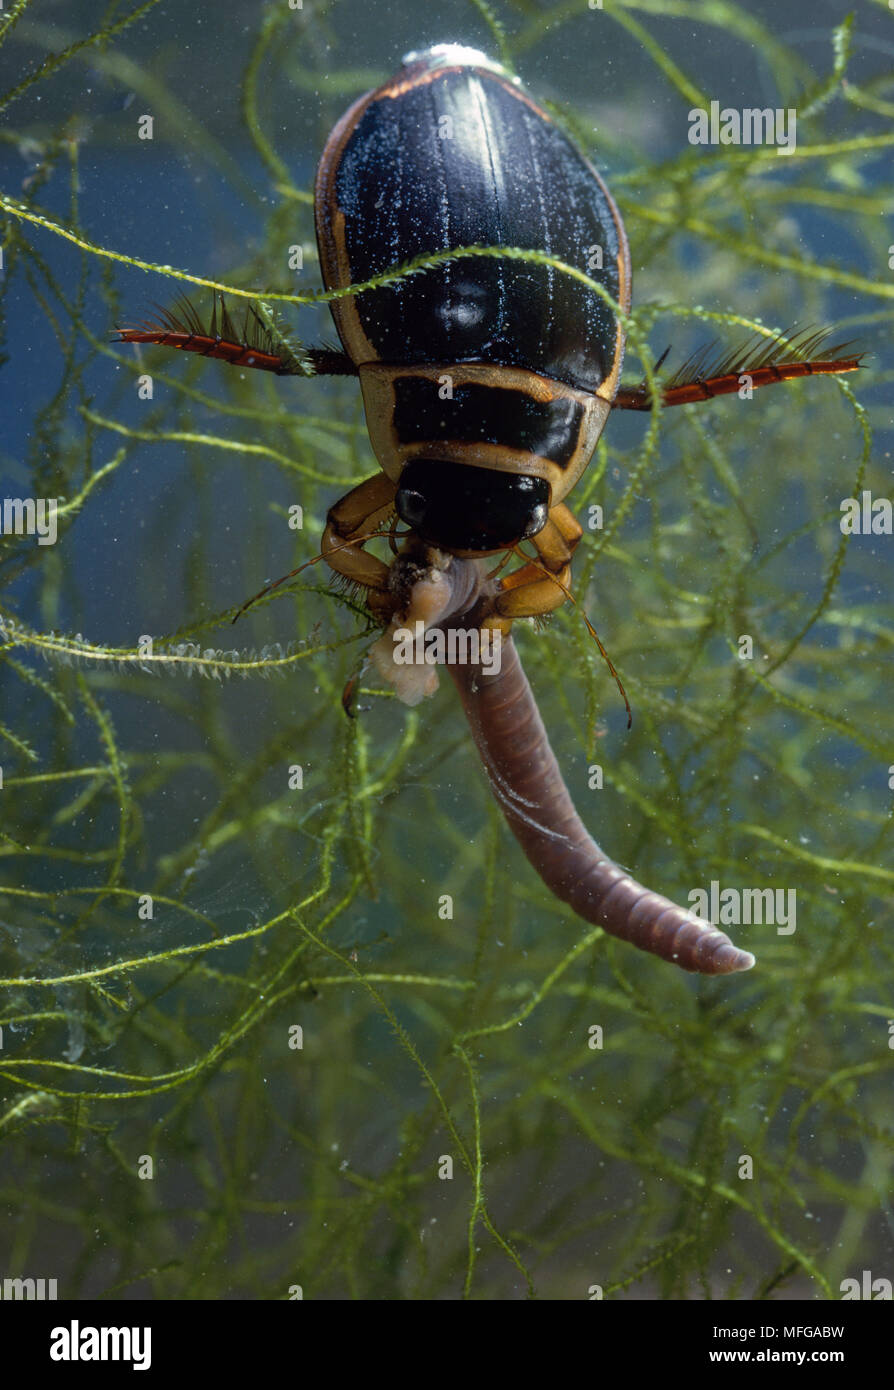 GREAT DIVING BEETLE Dytiscus marginalis male feeding on worm Stock Photo